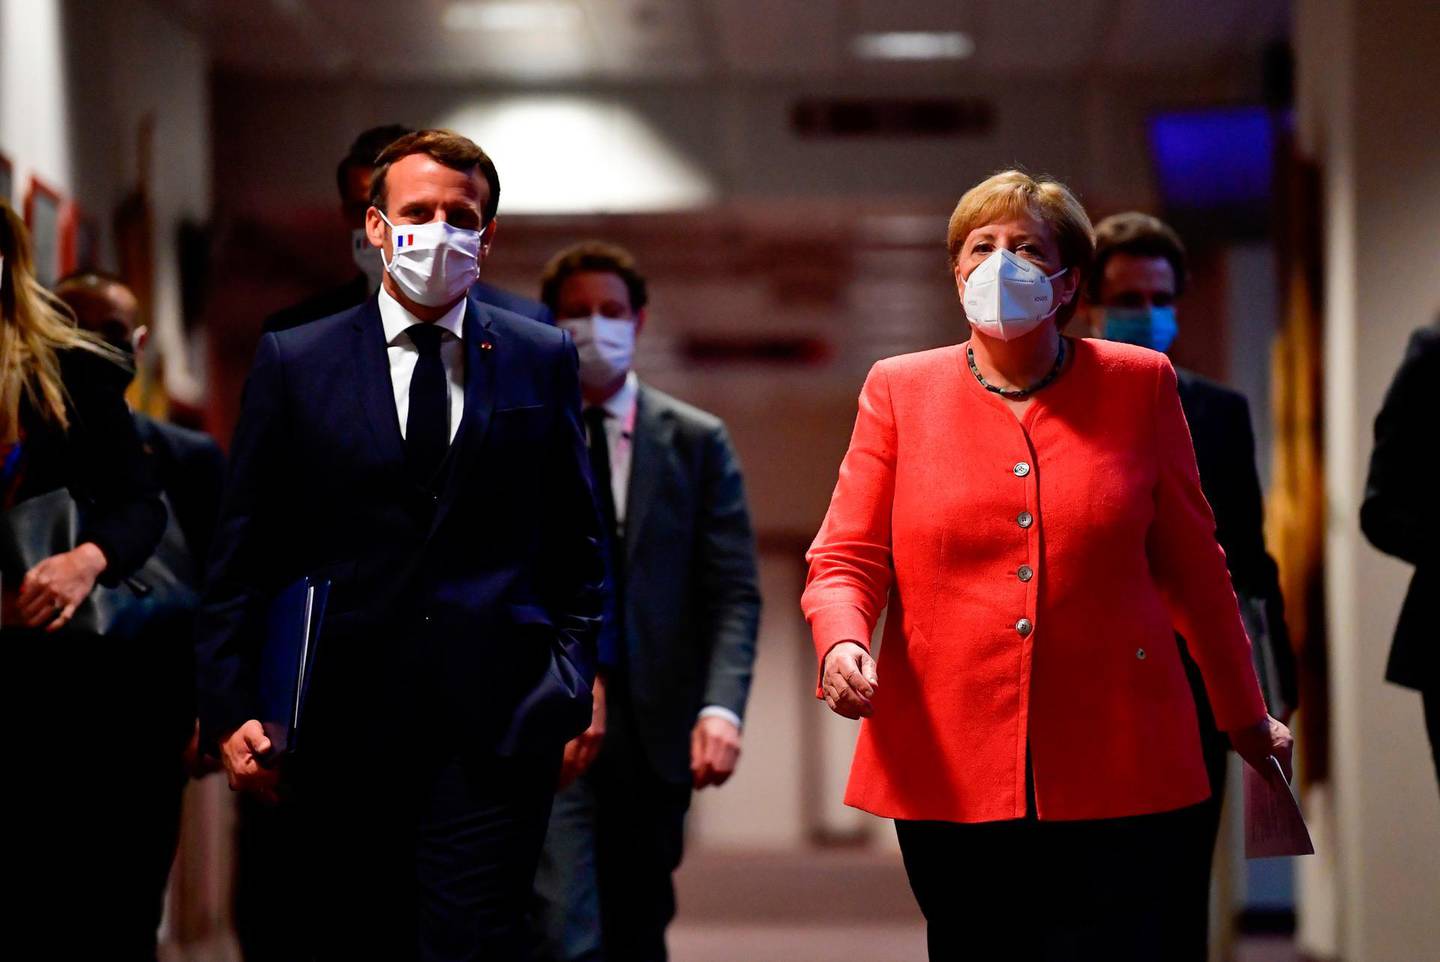 German Chancellor Angela Merkel (R) and French President Emmanuel Macron (L) arrive for a joint press conference at the end of the European summit at the EU headquarters in Brussels on July 21, 2020.  EU leaders approved a 750-billion-euro package to revive their coronavirus-ravaged economies after a tough 90-hour summit on July 21, along with a trillion-euro budget for the next seven years. / AFP / POOL / JOHN THYS
